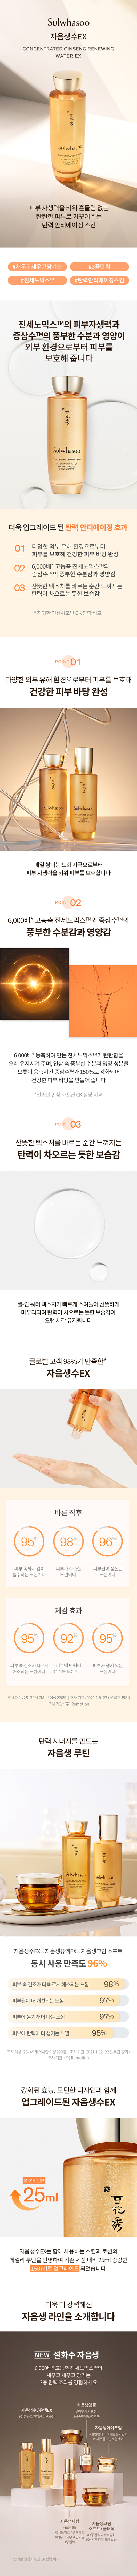 sulwhasoo-concentrated-ginseng-renewing-water-ex-info.png